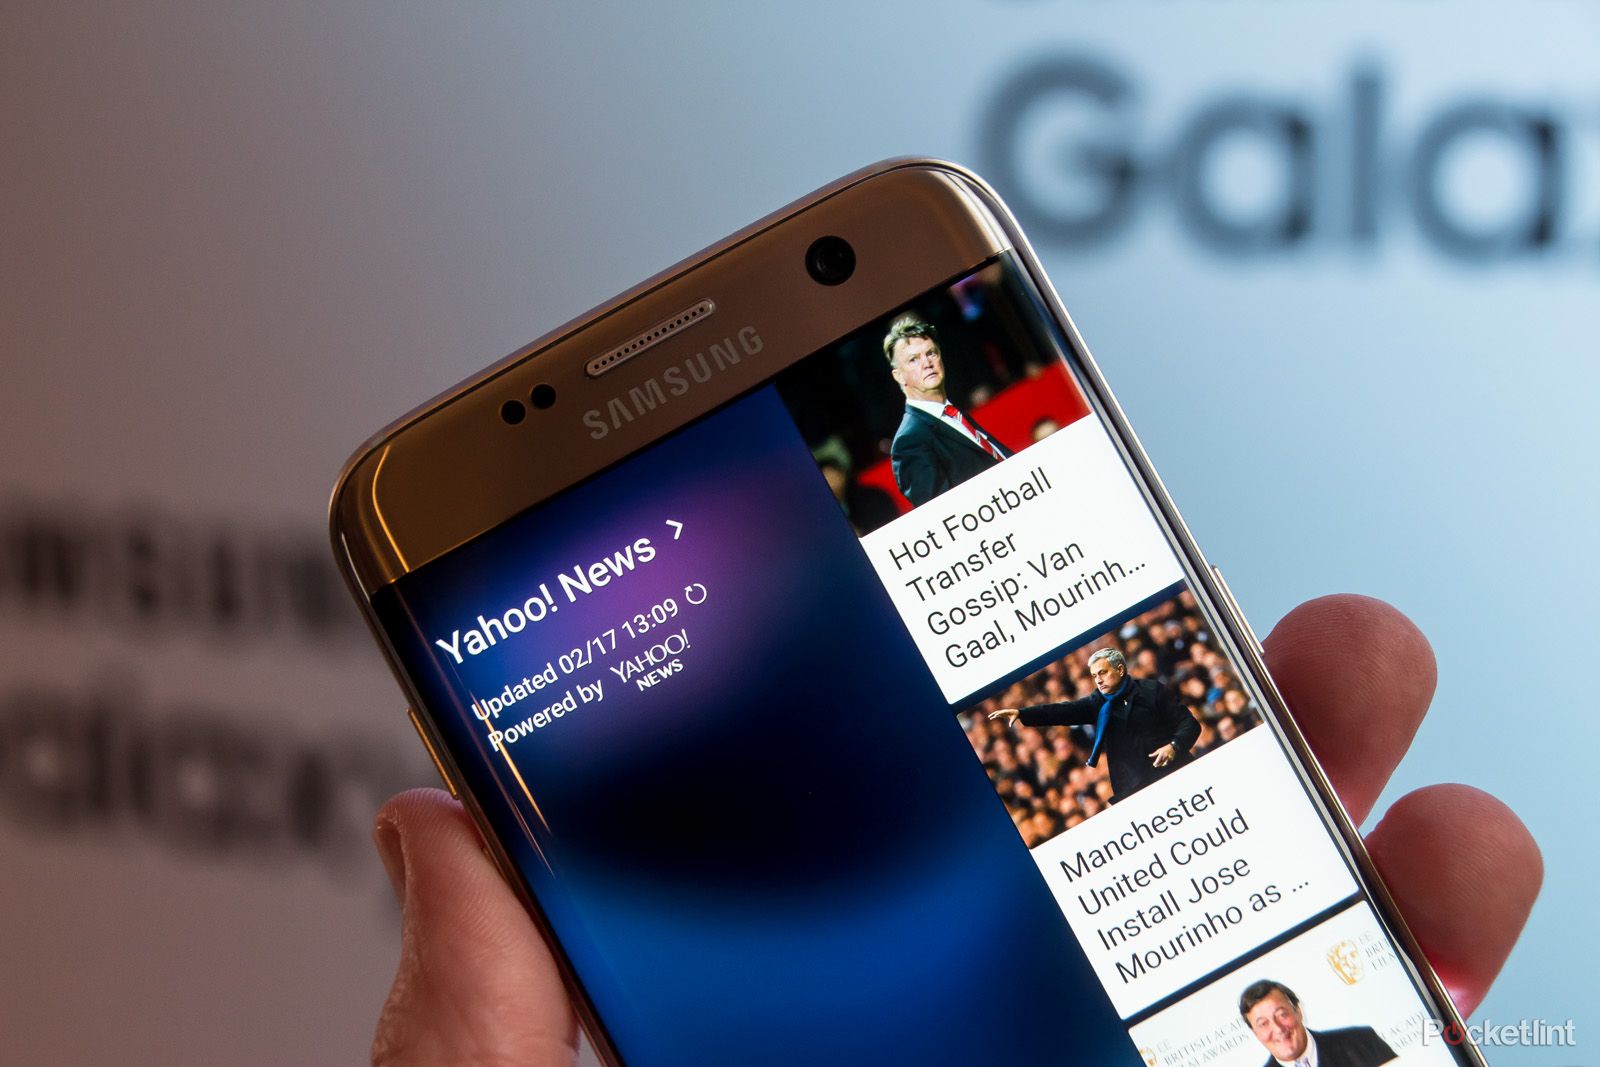 samsung galaxy s7 and galaxy s7 edge release date specs and everything you need to know image 4